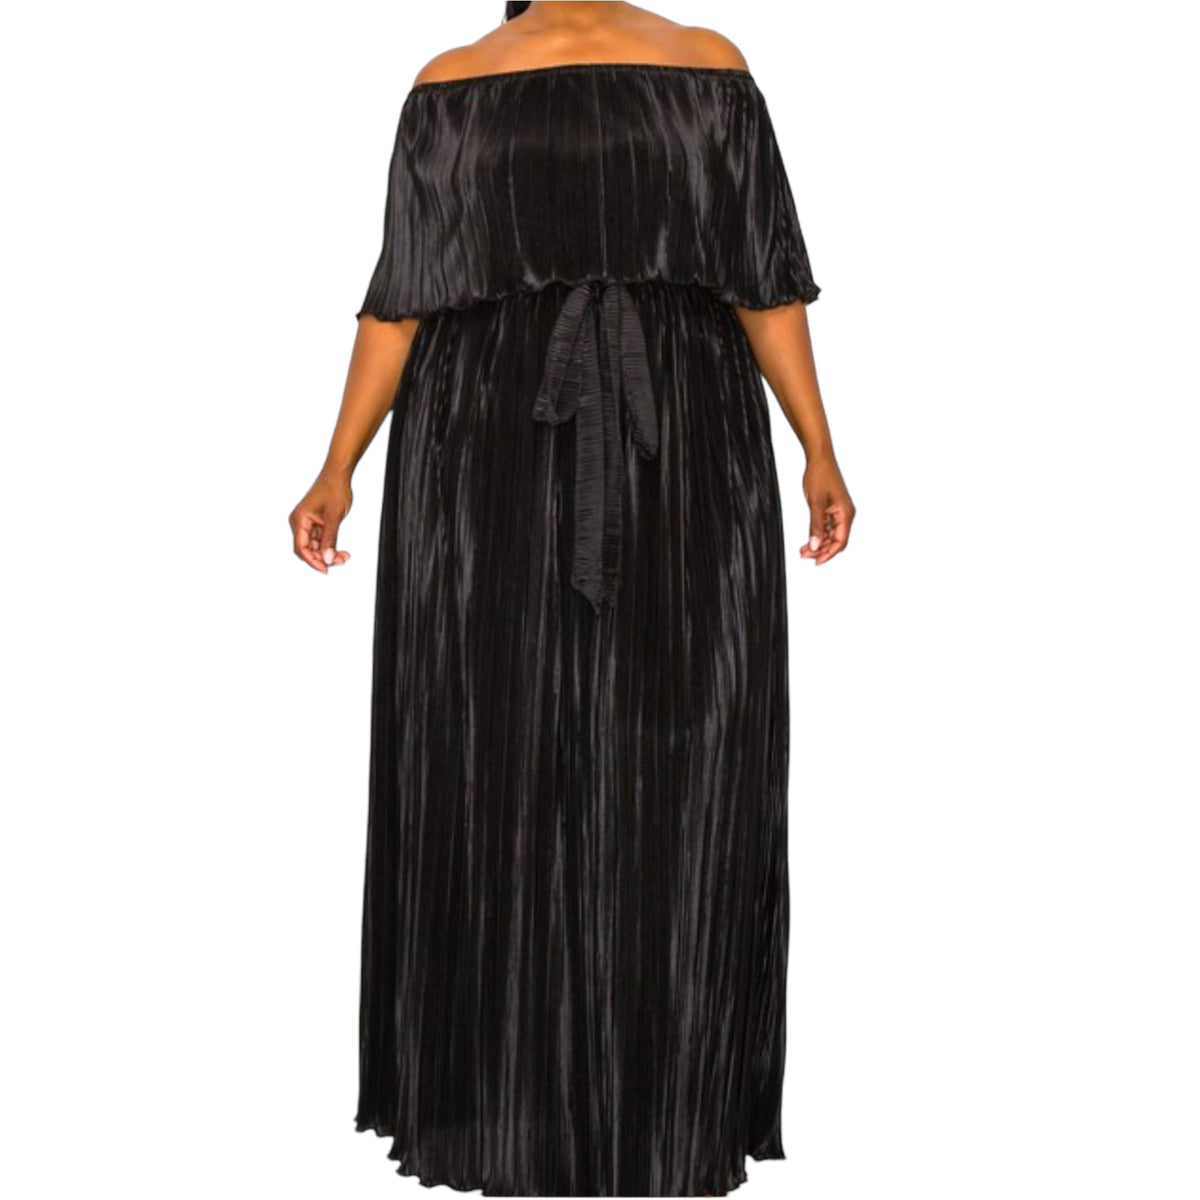 Black Pleated Off The Shoulder Maxi Dress - Fabulously Dressed Boutique 